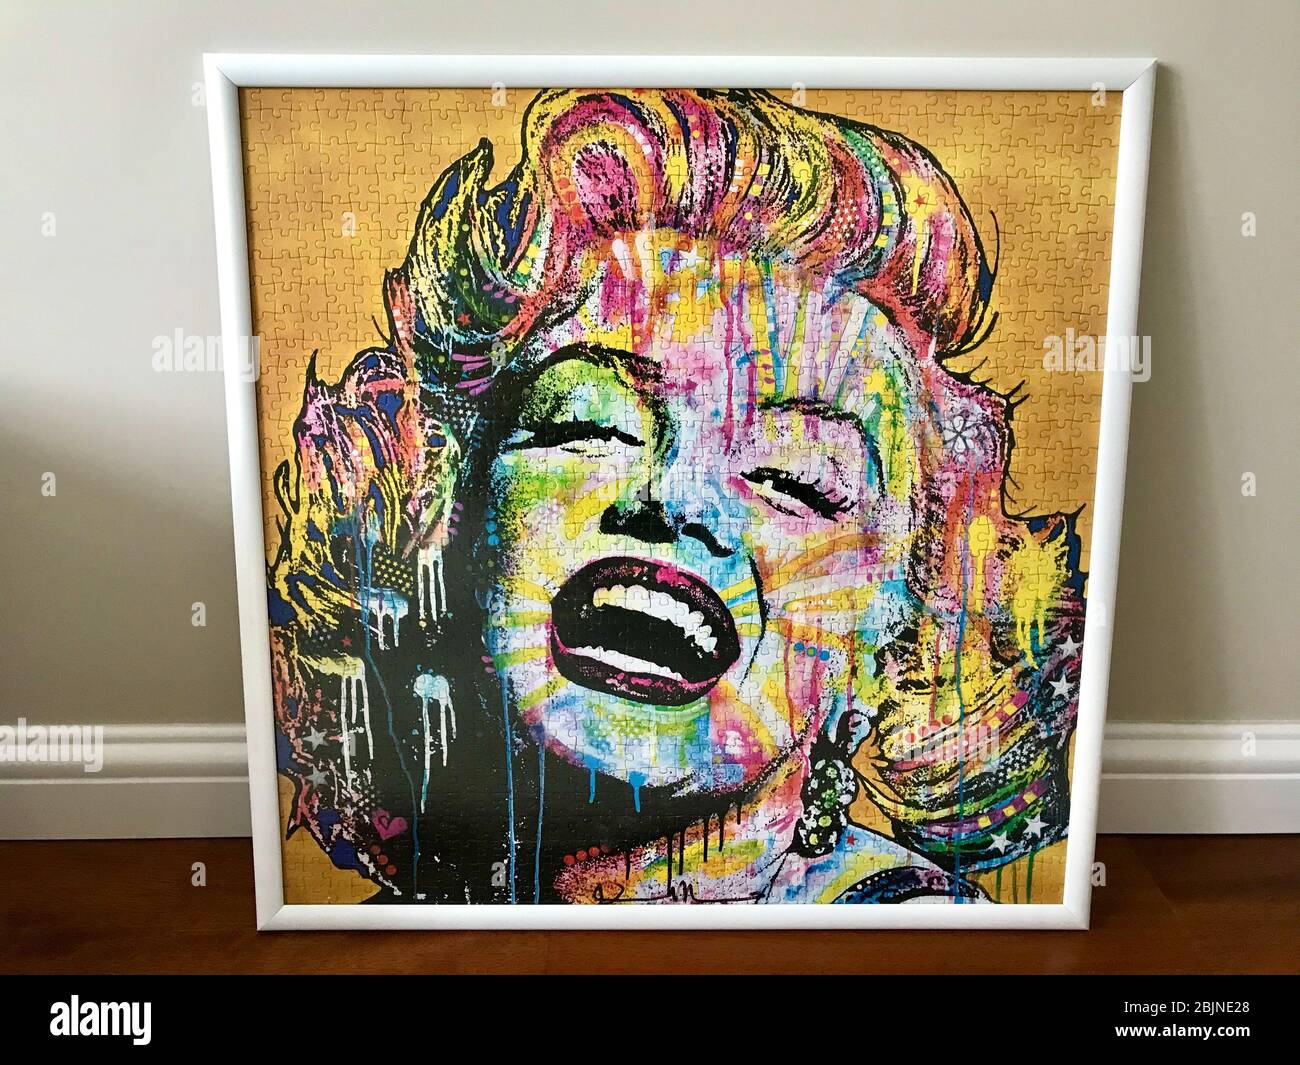 Istanbul, Turkey - March 23, 2020: Marilyn Monroe Puzzle with Frame Colorful Digital Pop Art. Ready to Use. Stock Photo